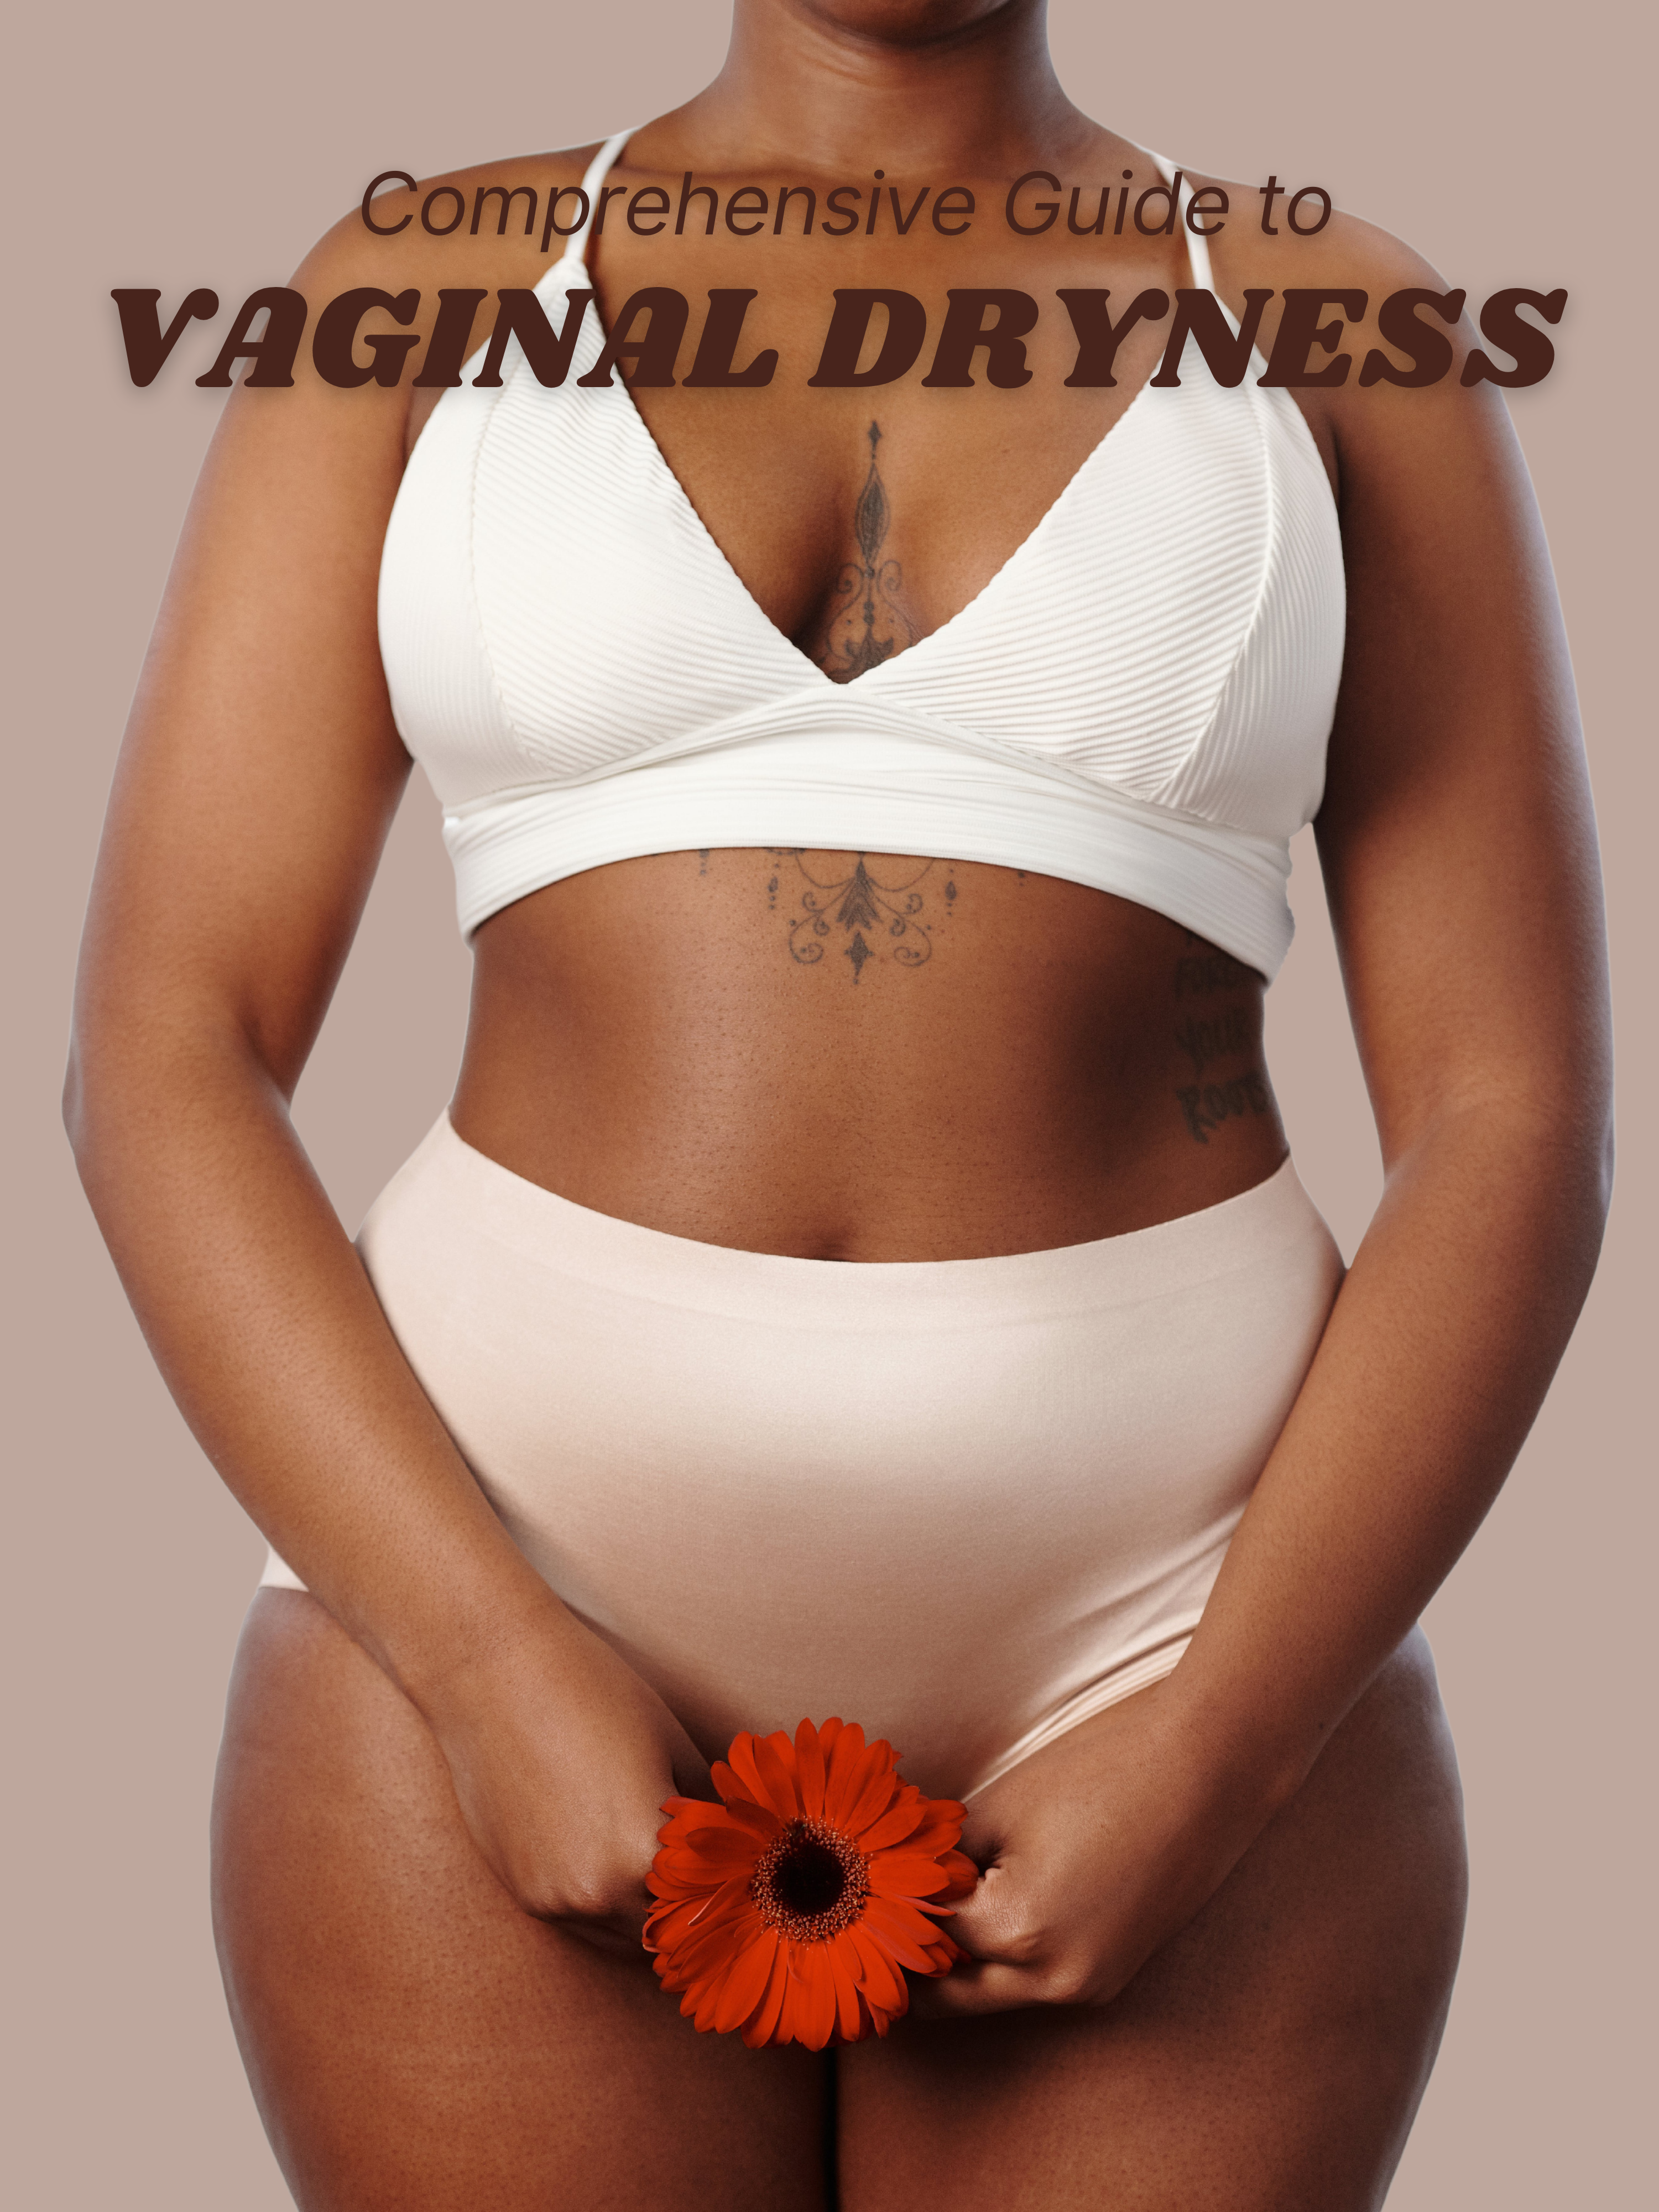 Comprehensive Guide to Vaginal Dryness: Causes, Symptoms, and Effective Natural Remedies for Relief